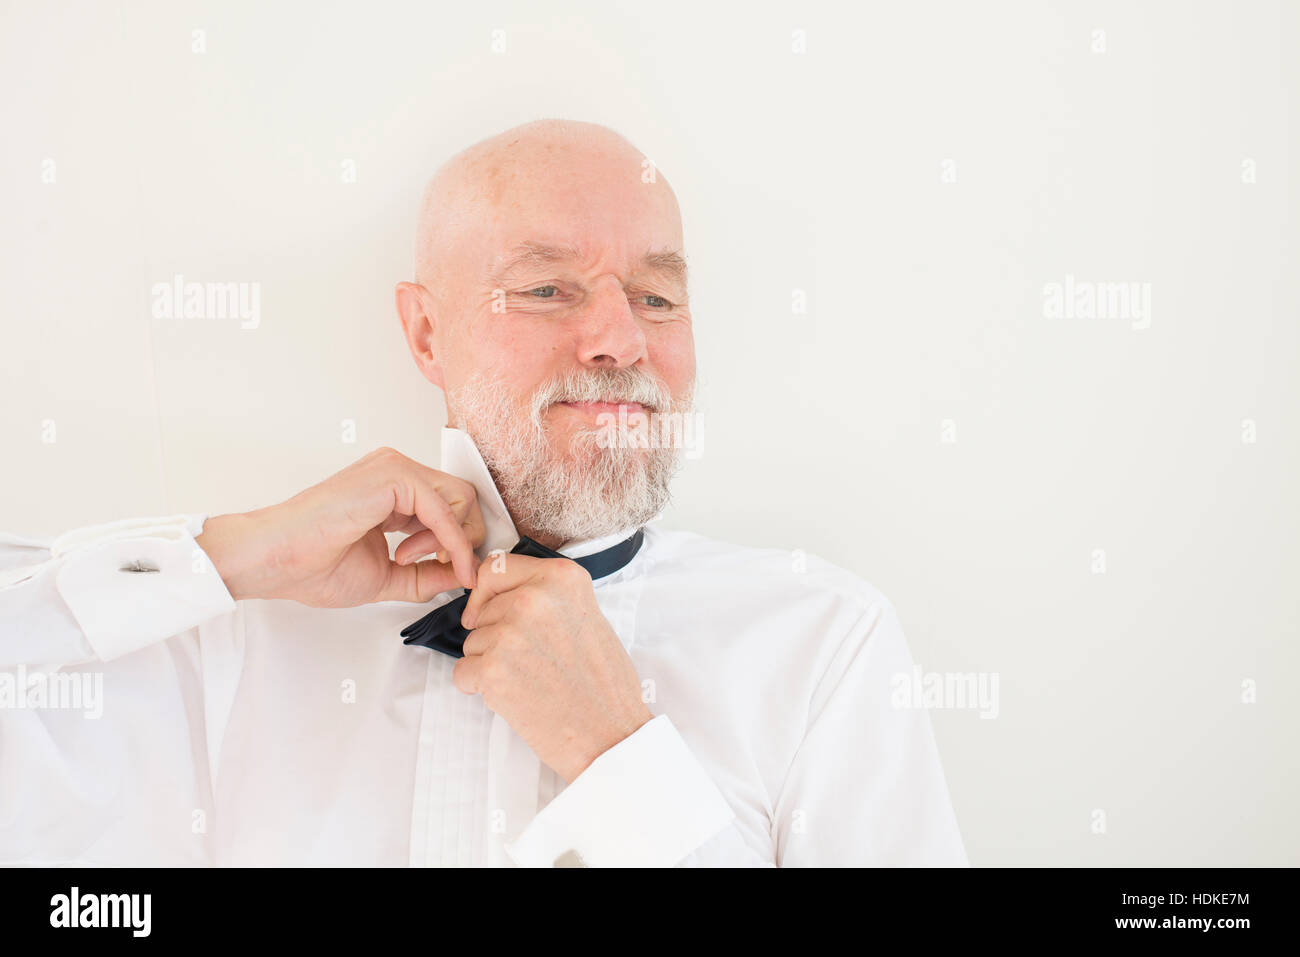 Old man putting on black bowtie and white shirt at home. Lifestyle moment of active retirement and preparing for wedding party or elegant occasion. Stock Photo